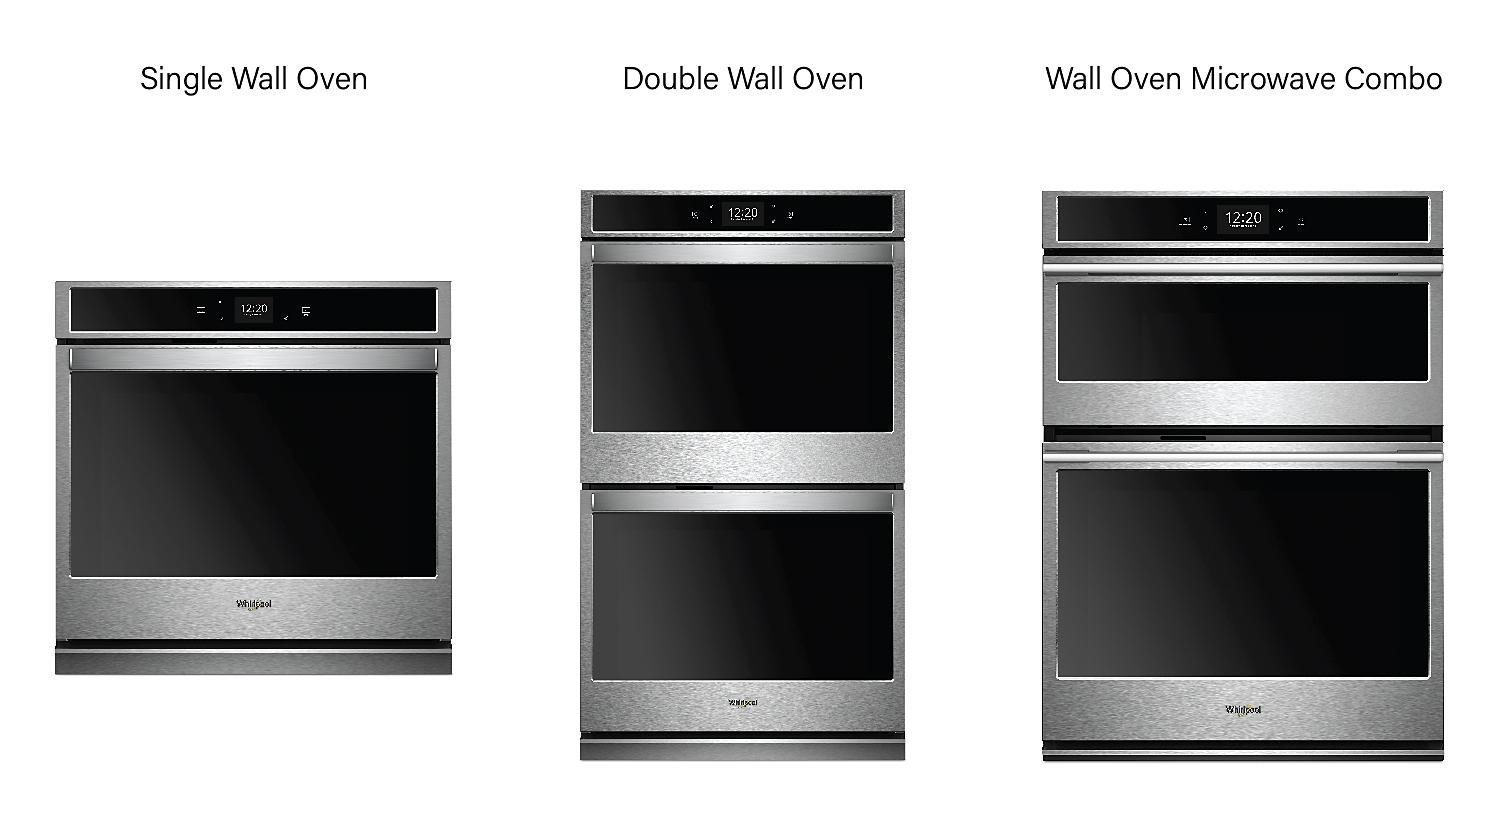 Standard wall oven sizes are single, double, and oven microwave combo